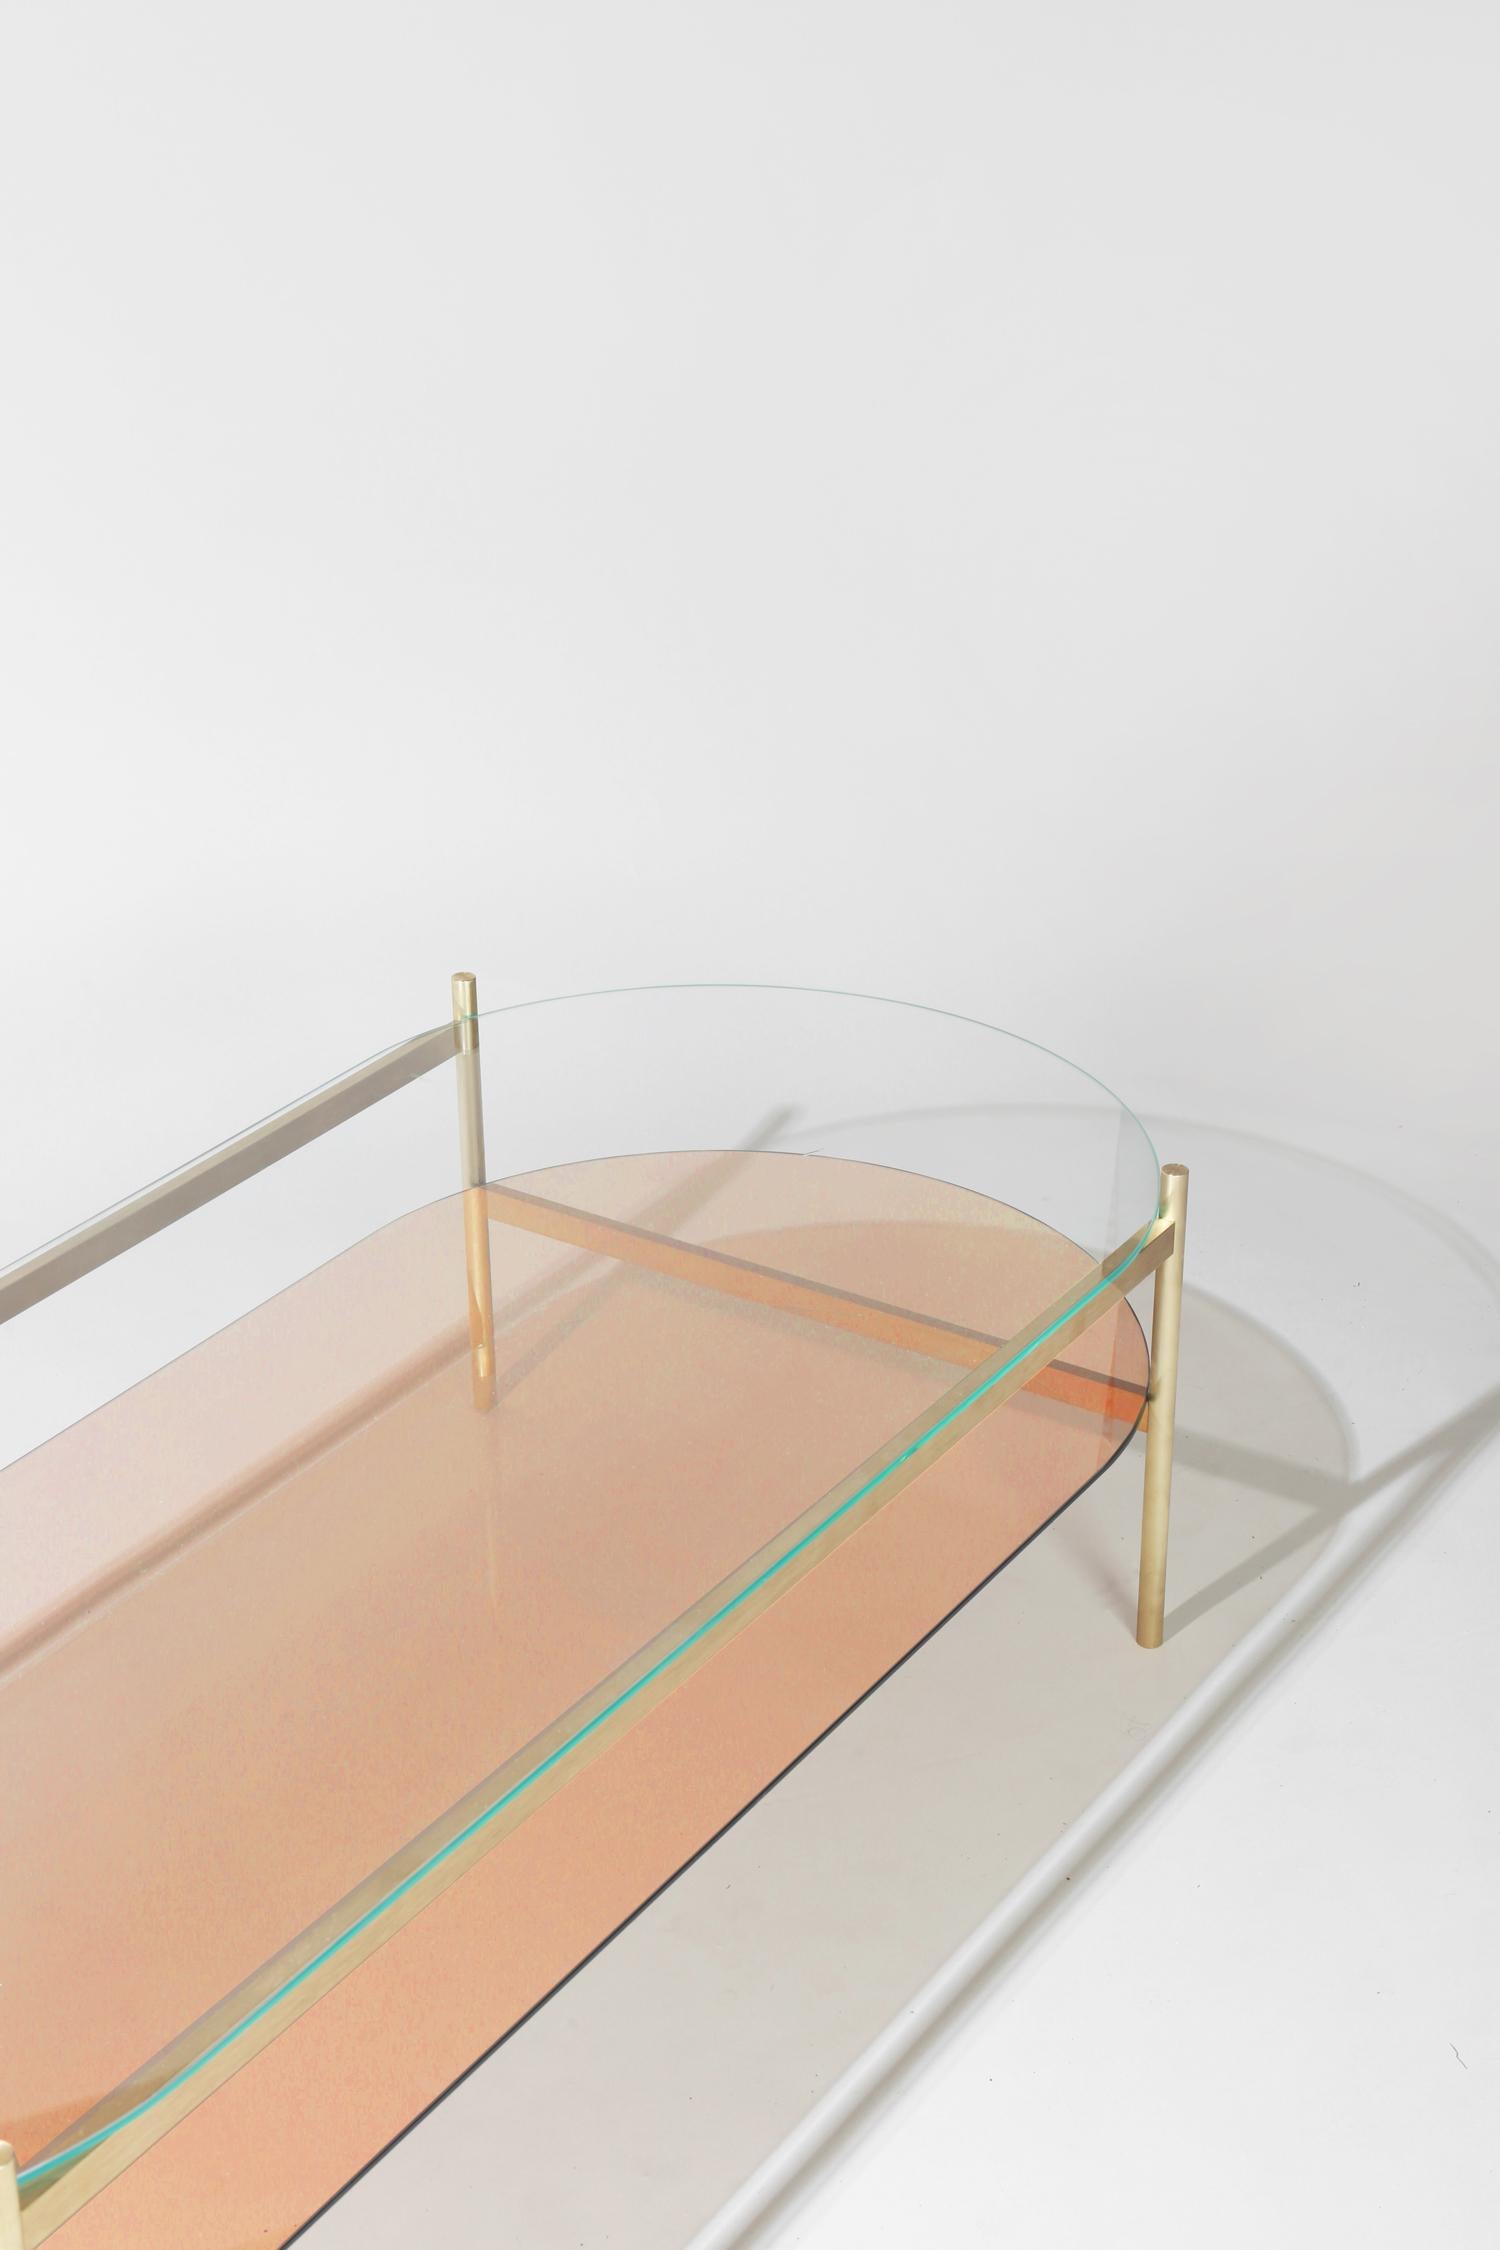 Made to order. Please allow 6 weeks for production.

Brass Frame / Clear Glass / Rose Glass

The Duotone coffee table is a commercial grade table made from precision machined solid brass. Each table is made locally in St. Augustine, Florida with